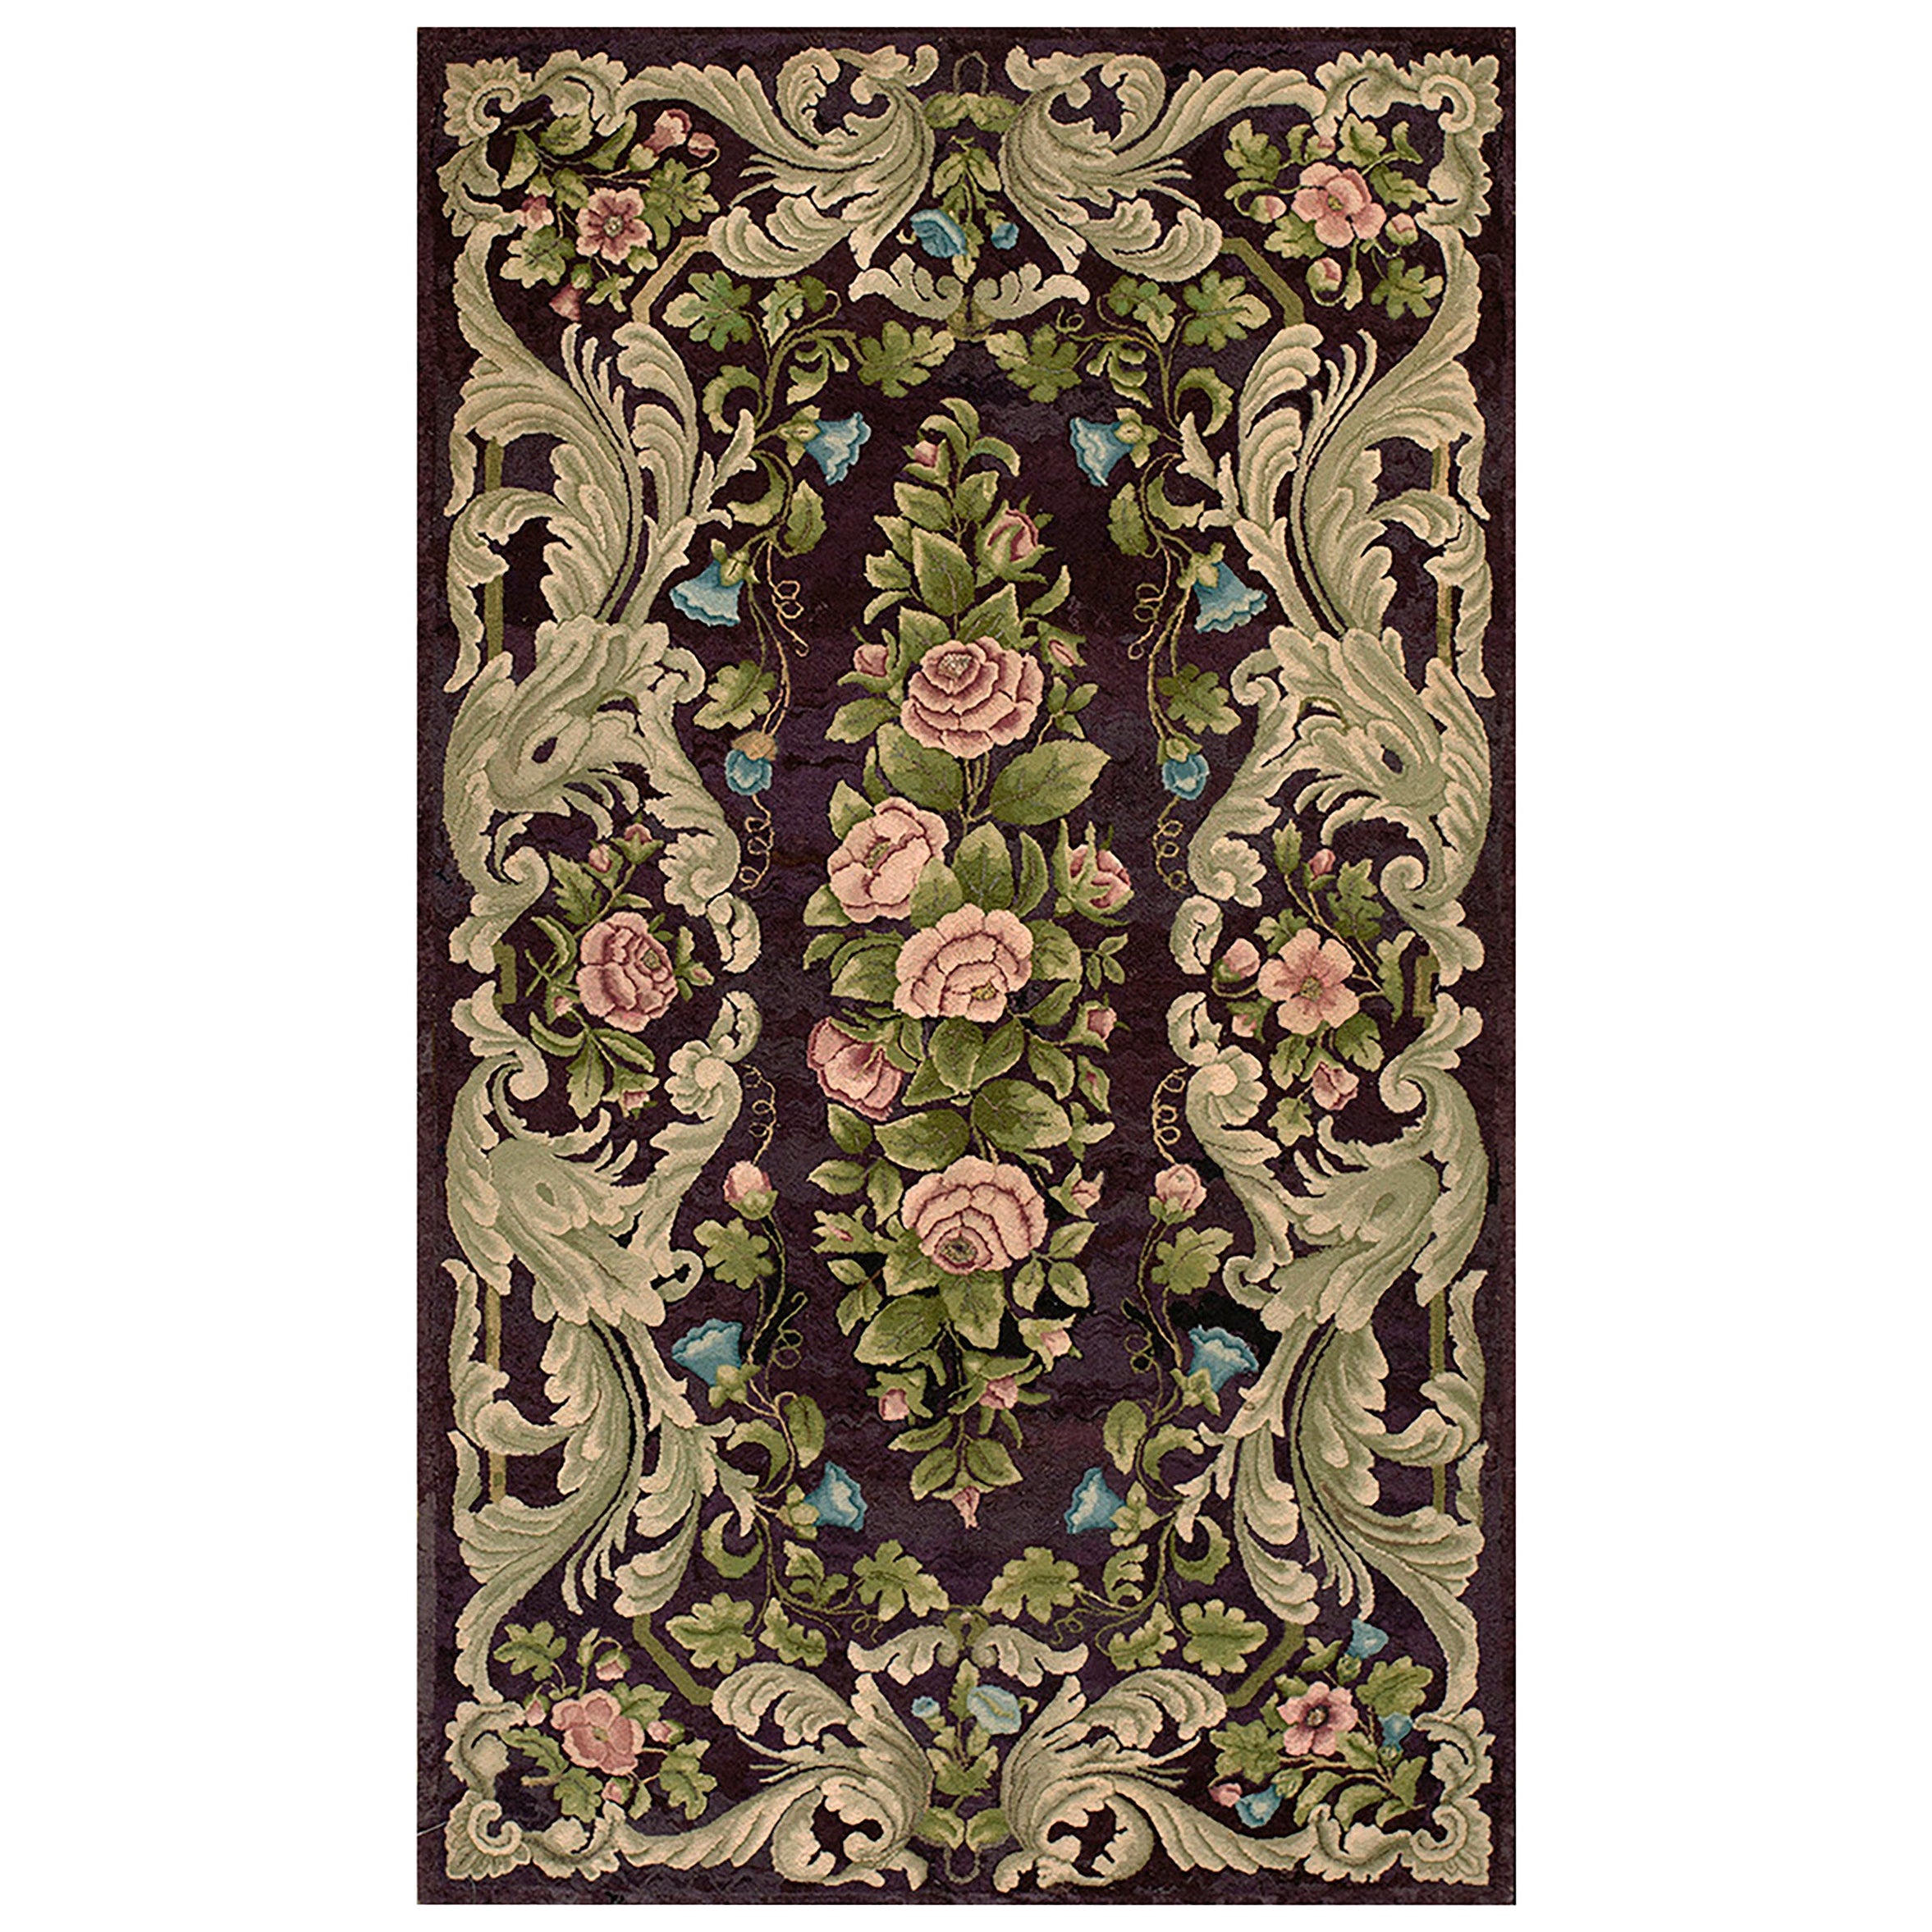 Early 20th Century American Hooked Rug ( 4' x 6'2'' - 122 x 188 cm )  For Sale